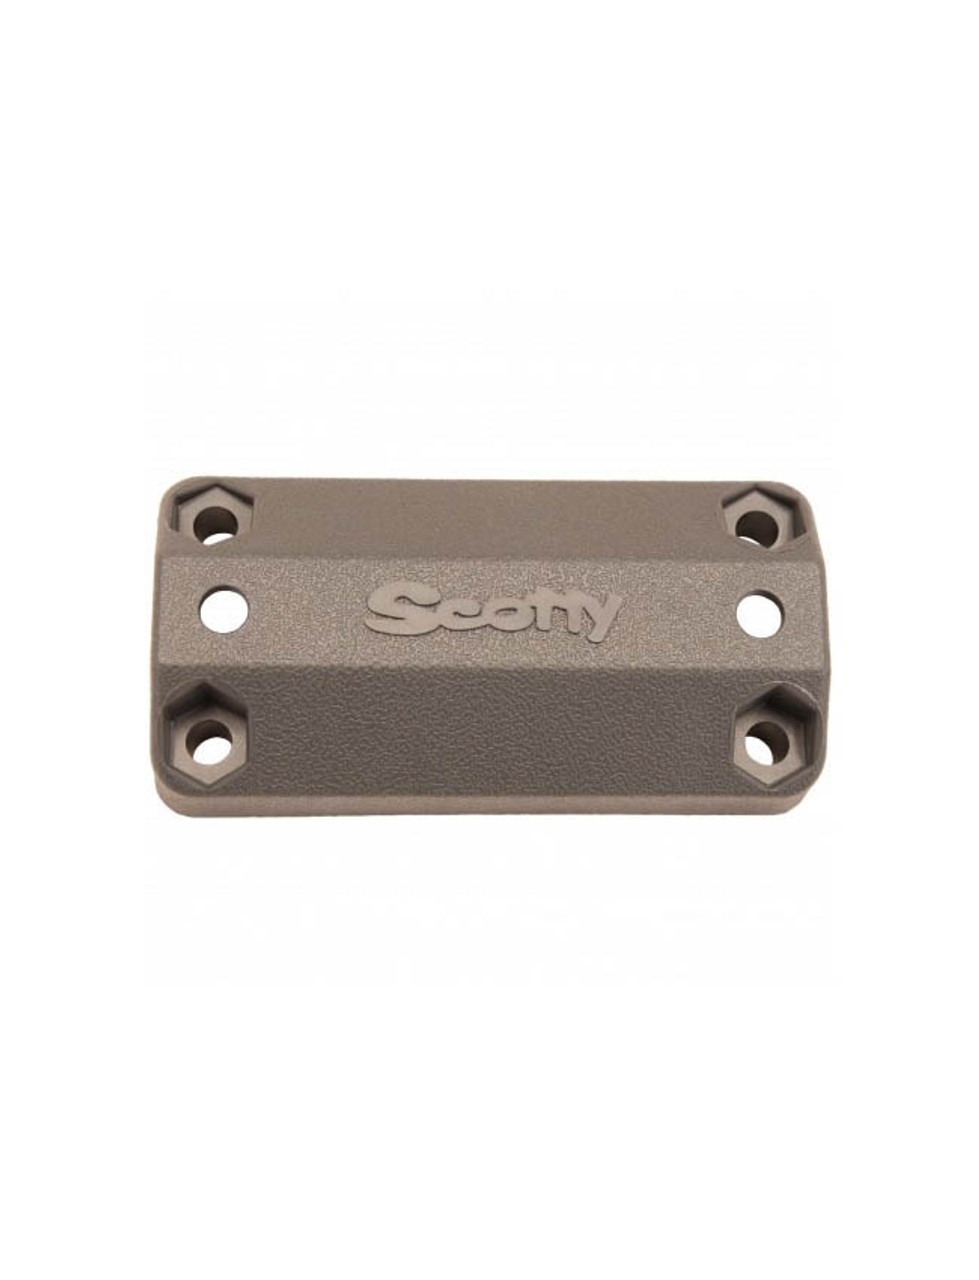 SCOTTY - Rail Mount Adapter - Grey - The Harbour Chandler